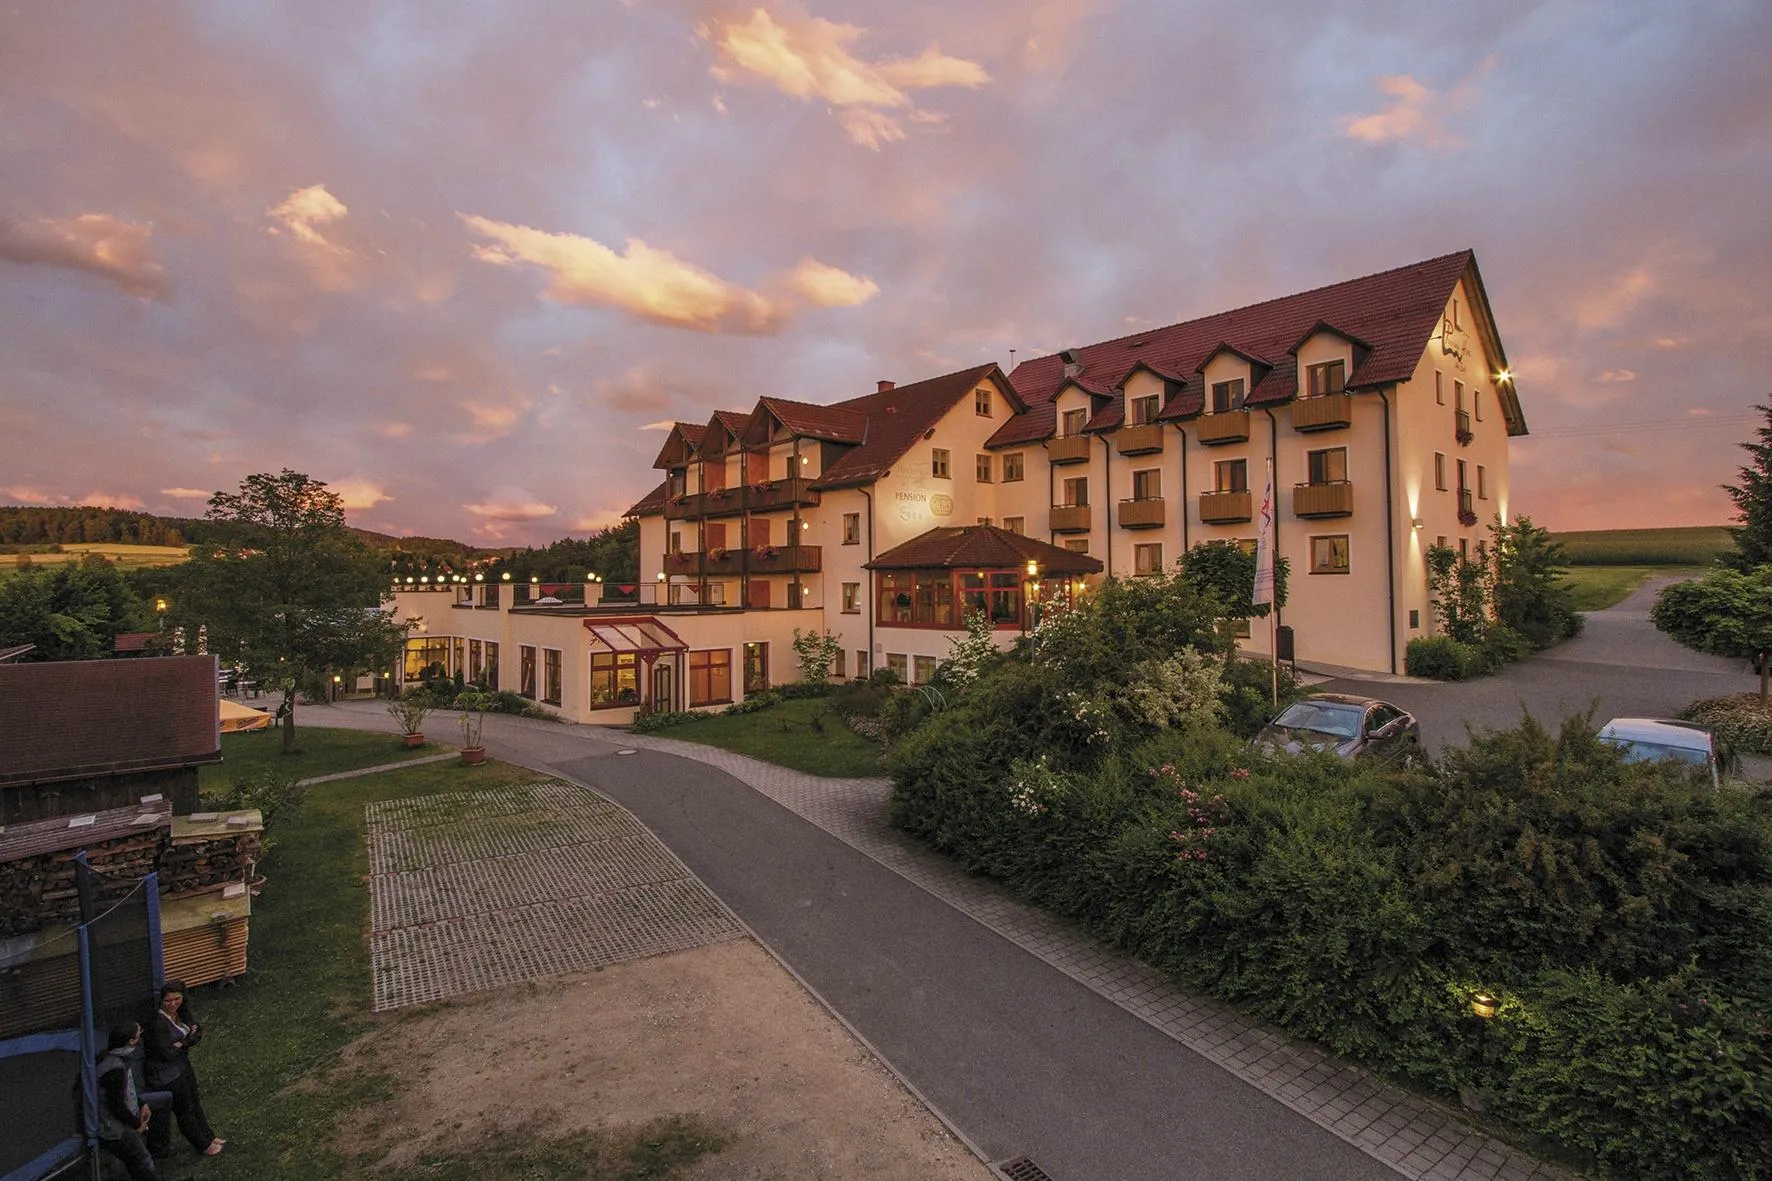 Building hotel Panorama-Hotel am See